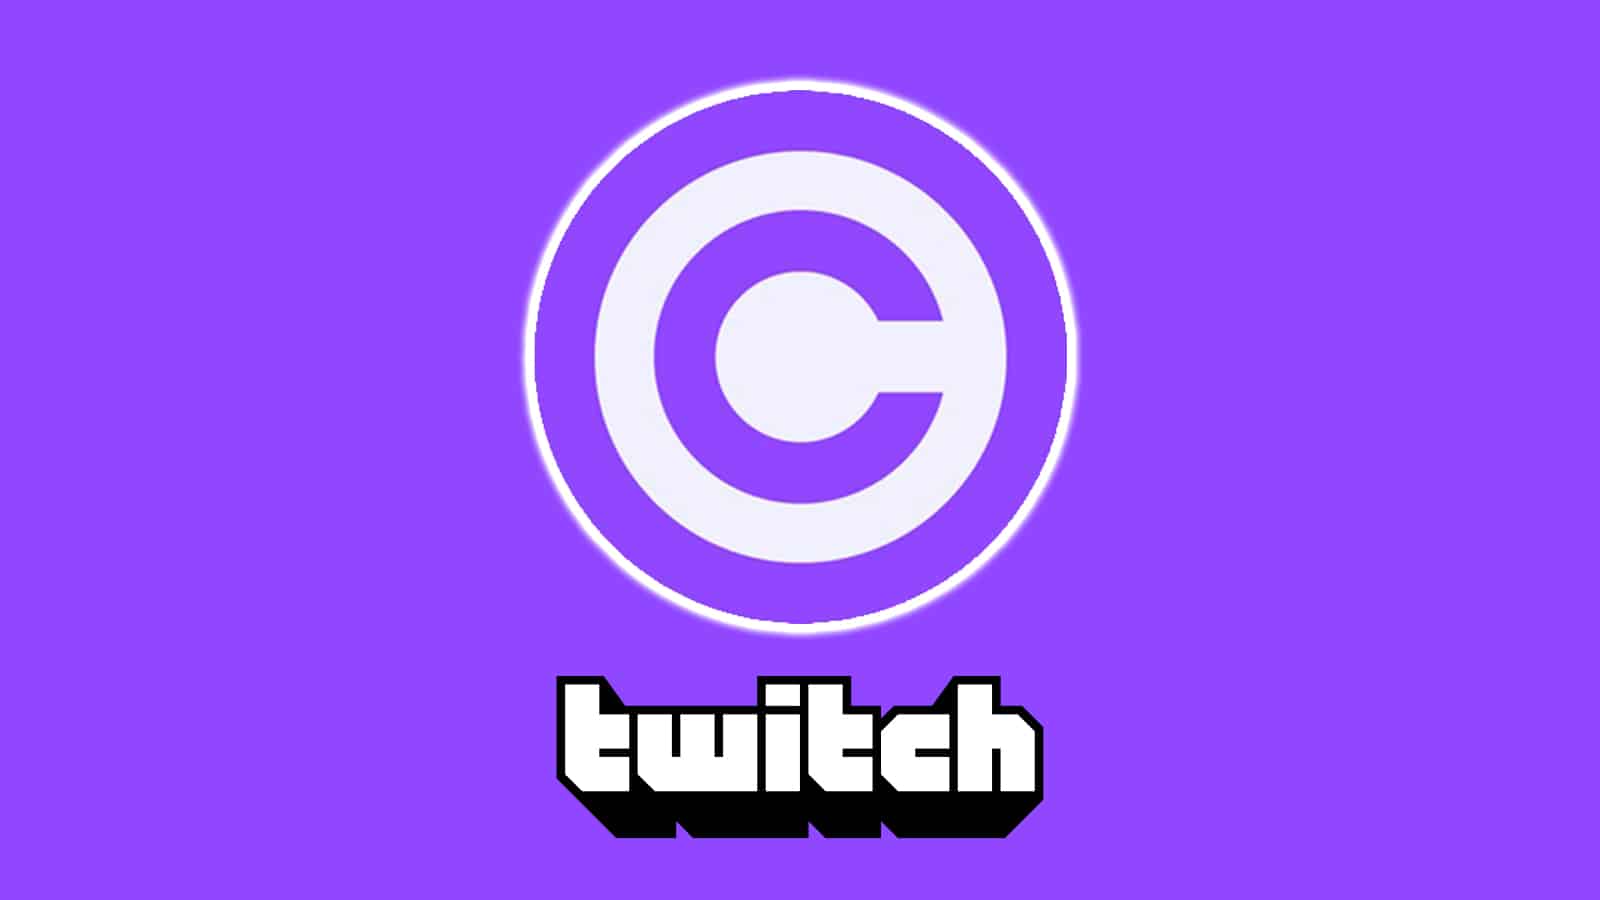 Twitch reveals DMCA strikes "aren't permanent" anymore in YouTube-inspired update